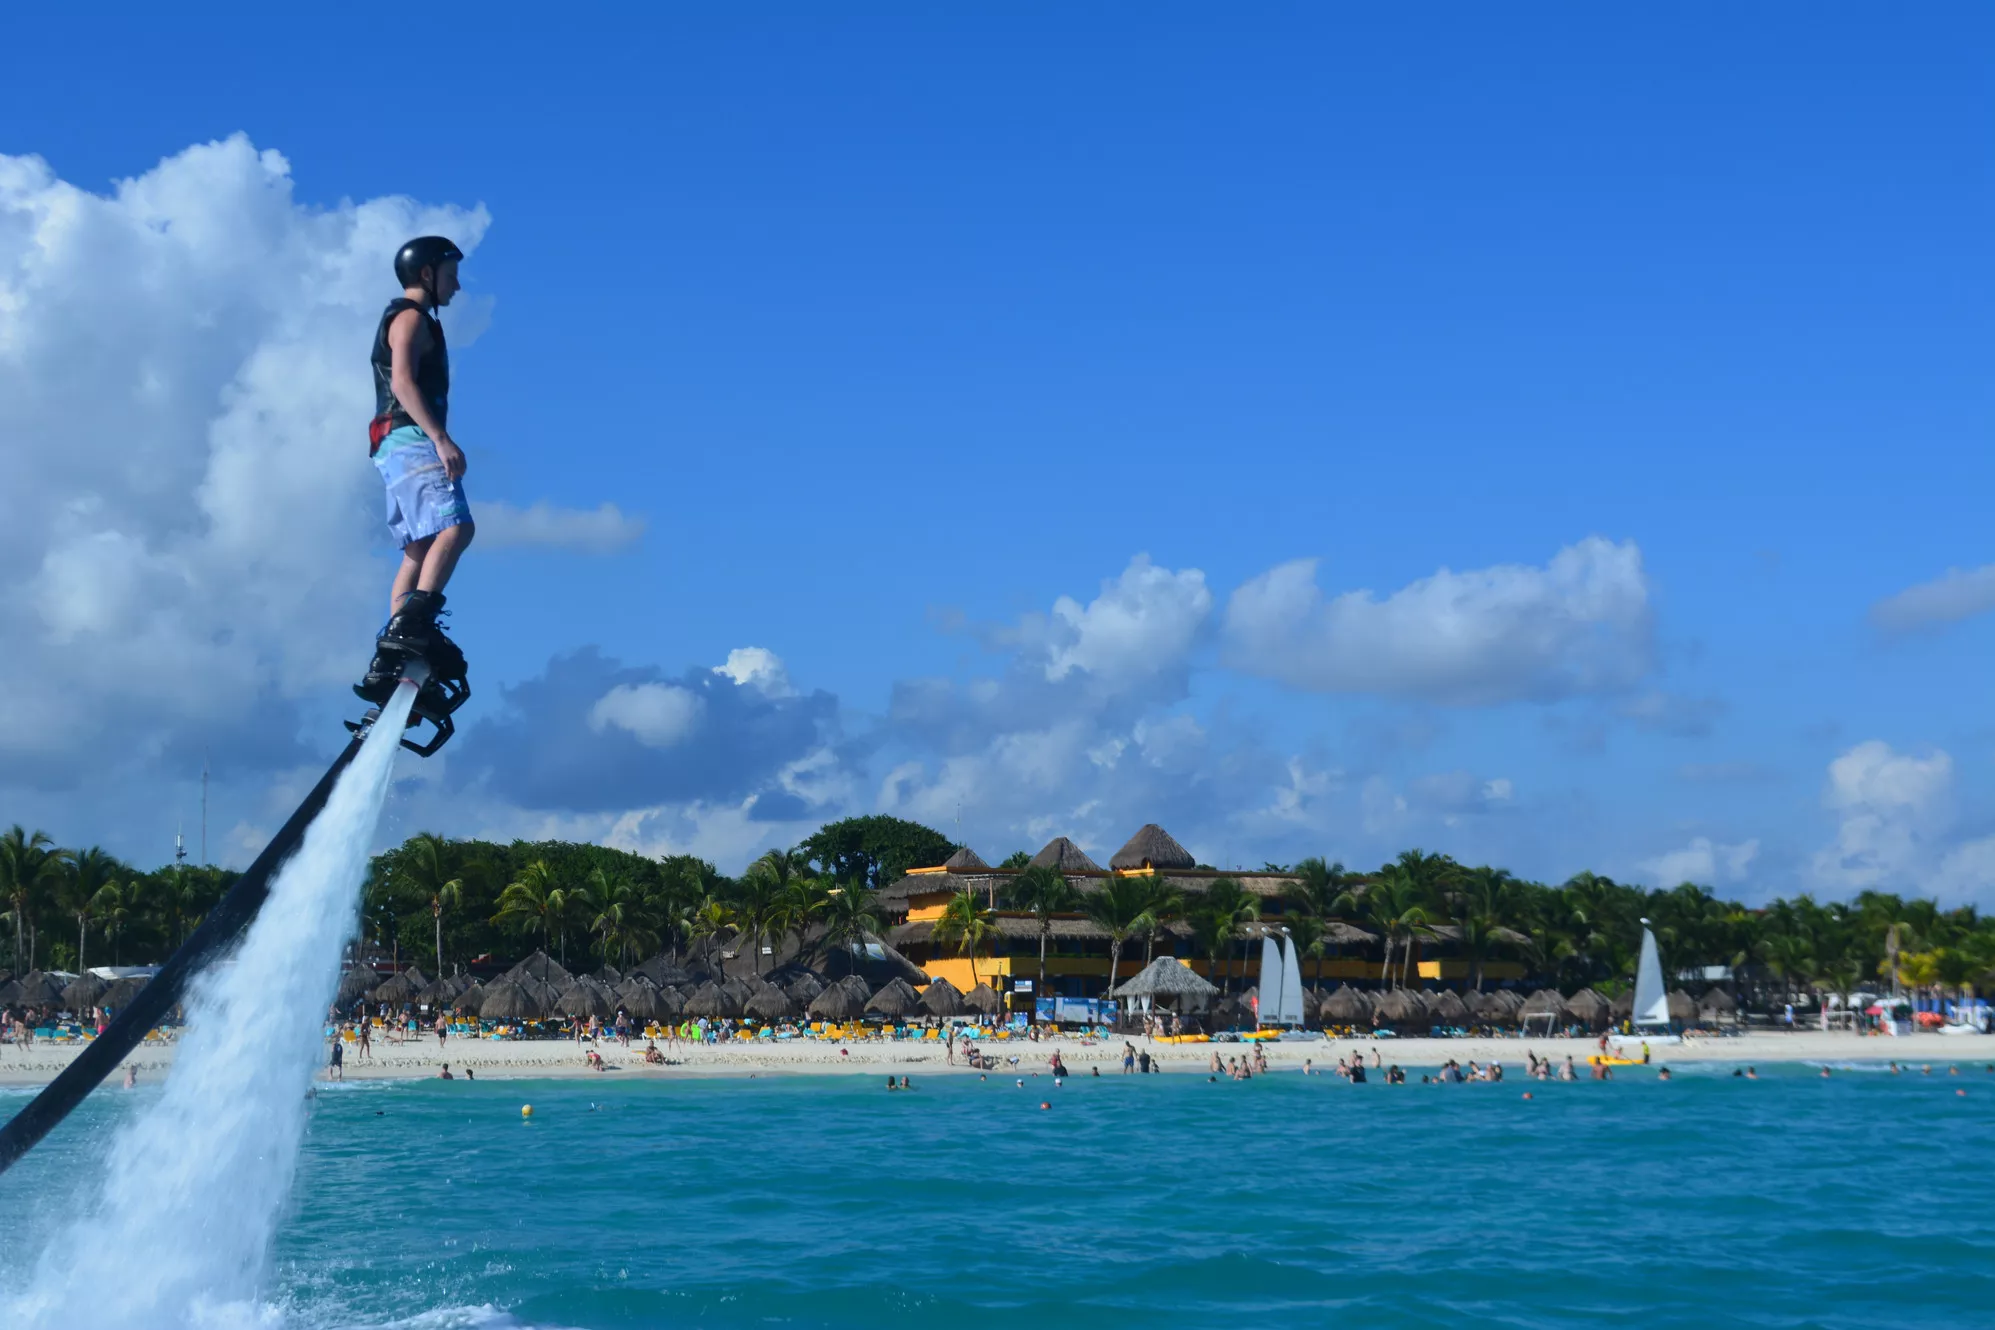 Luquillo Flyboard in Puerto Rico, Caribbean | Flyboarding - Rated 1.8